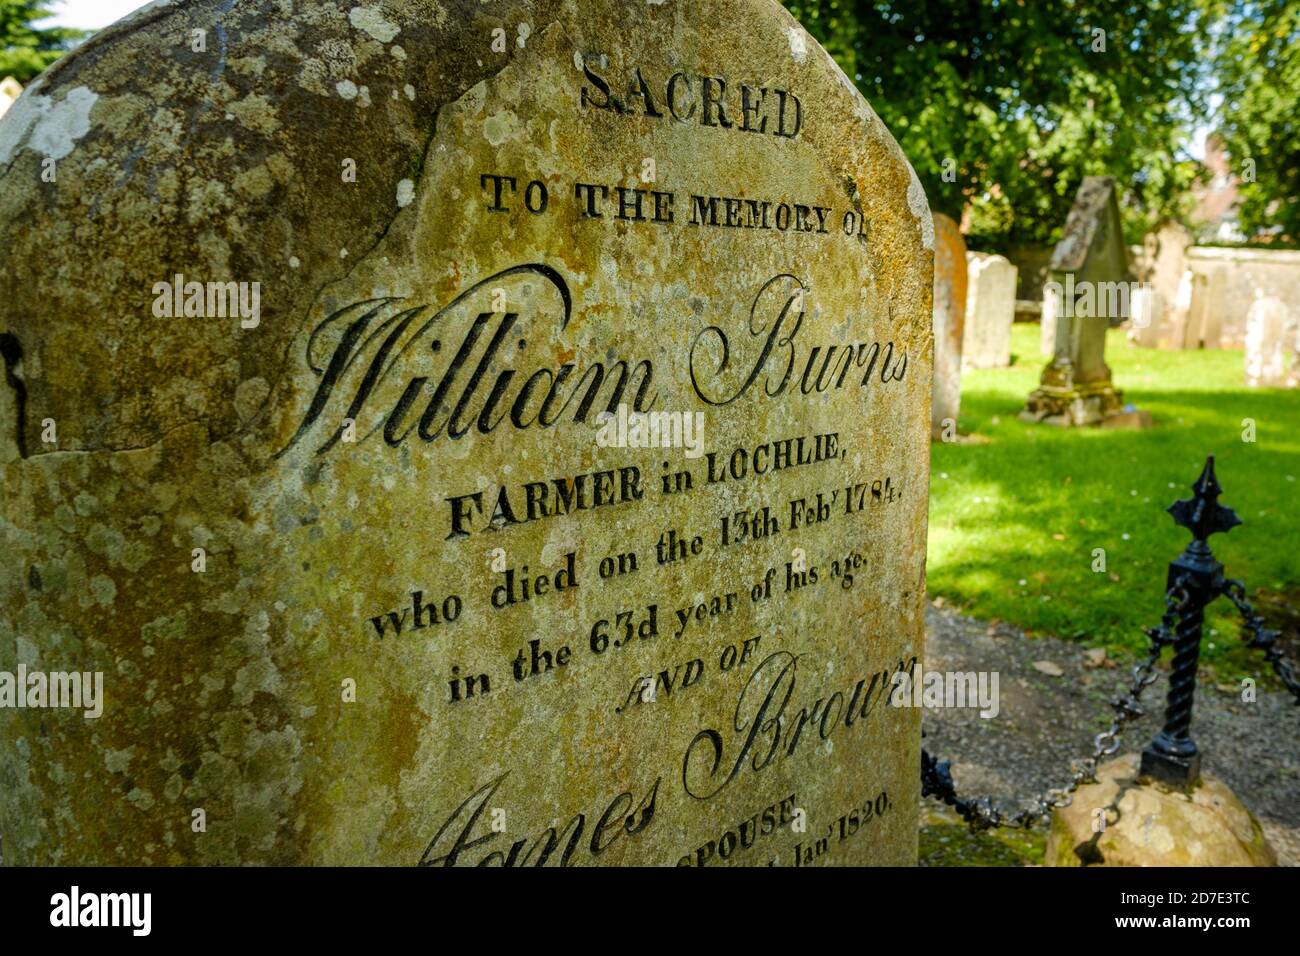 Gravestone of William Burns, father of Robert or Rabbie Burns, in Alloway Auld Kirk (Old Church). Alloway Kirk was the setting for one of Burns' most famous poems 'Tam O' Shanter'. Stock Photo